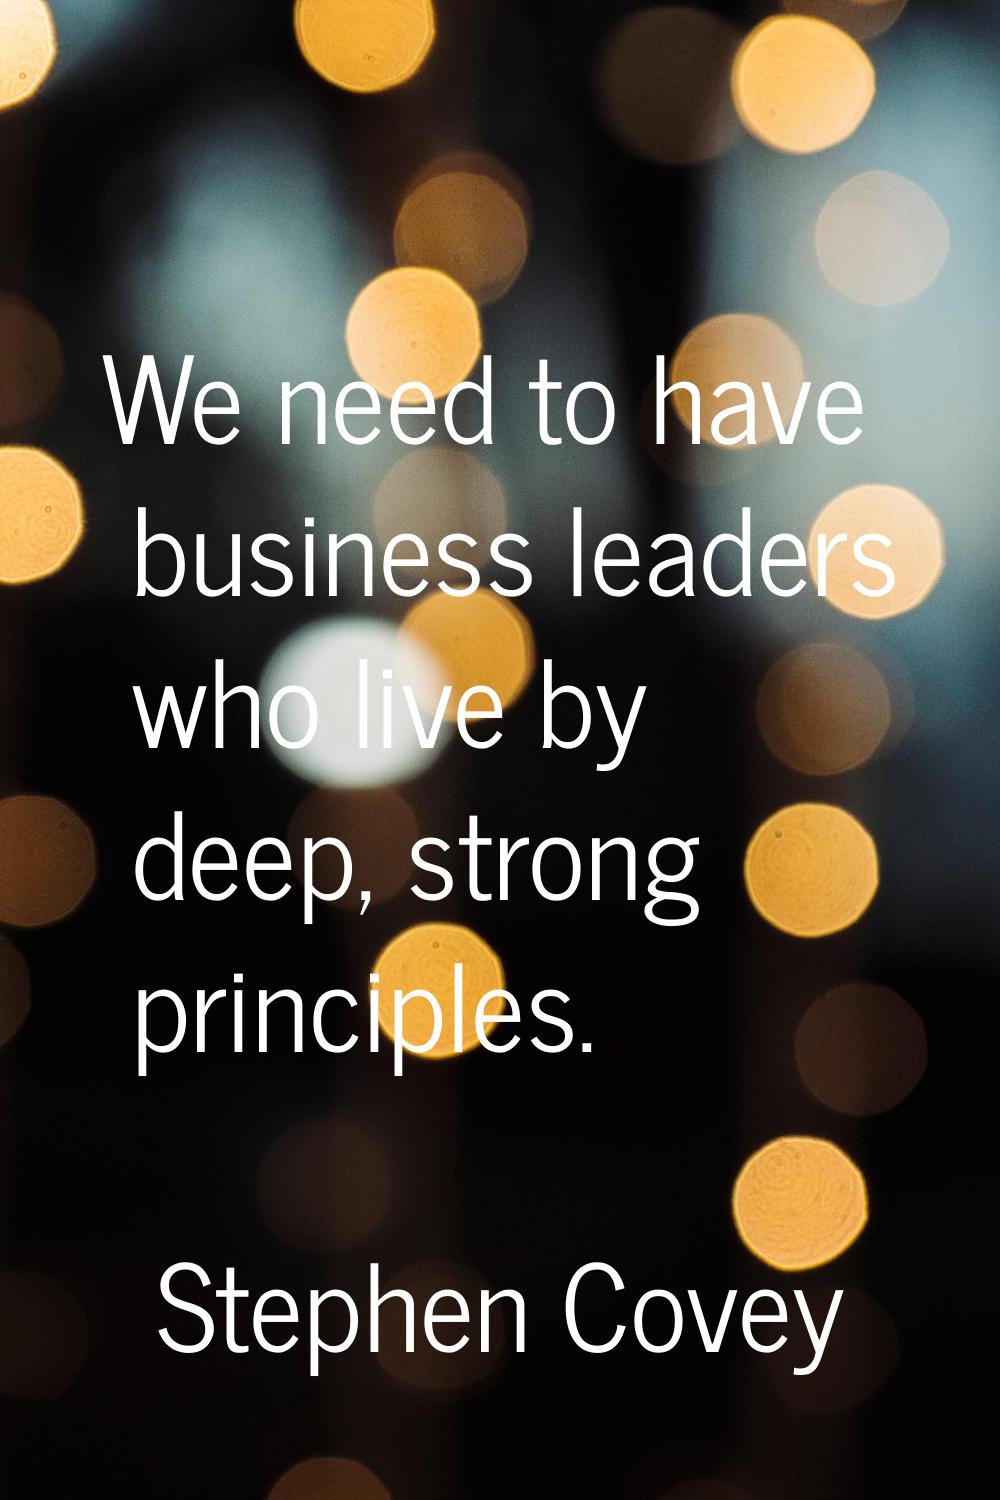 We need to have business leaders who live by deep, strong principles.